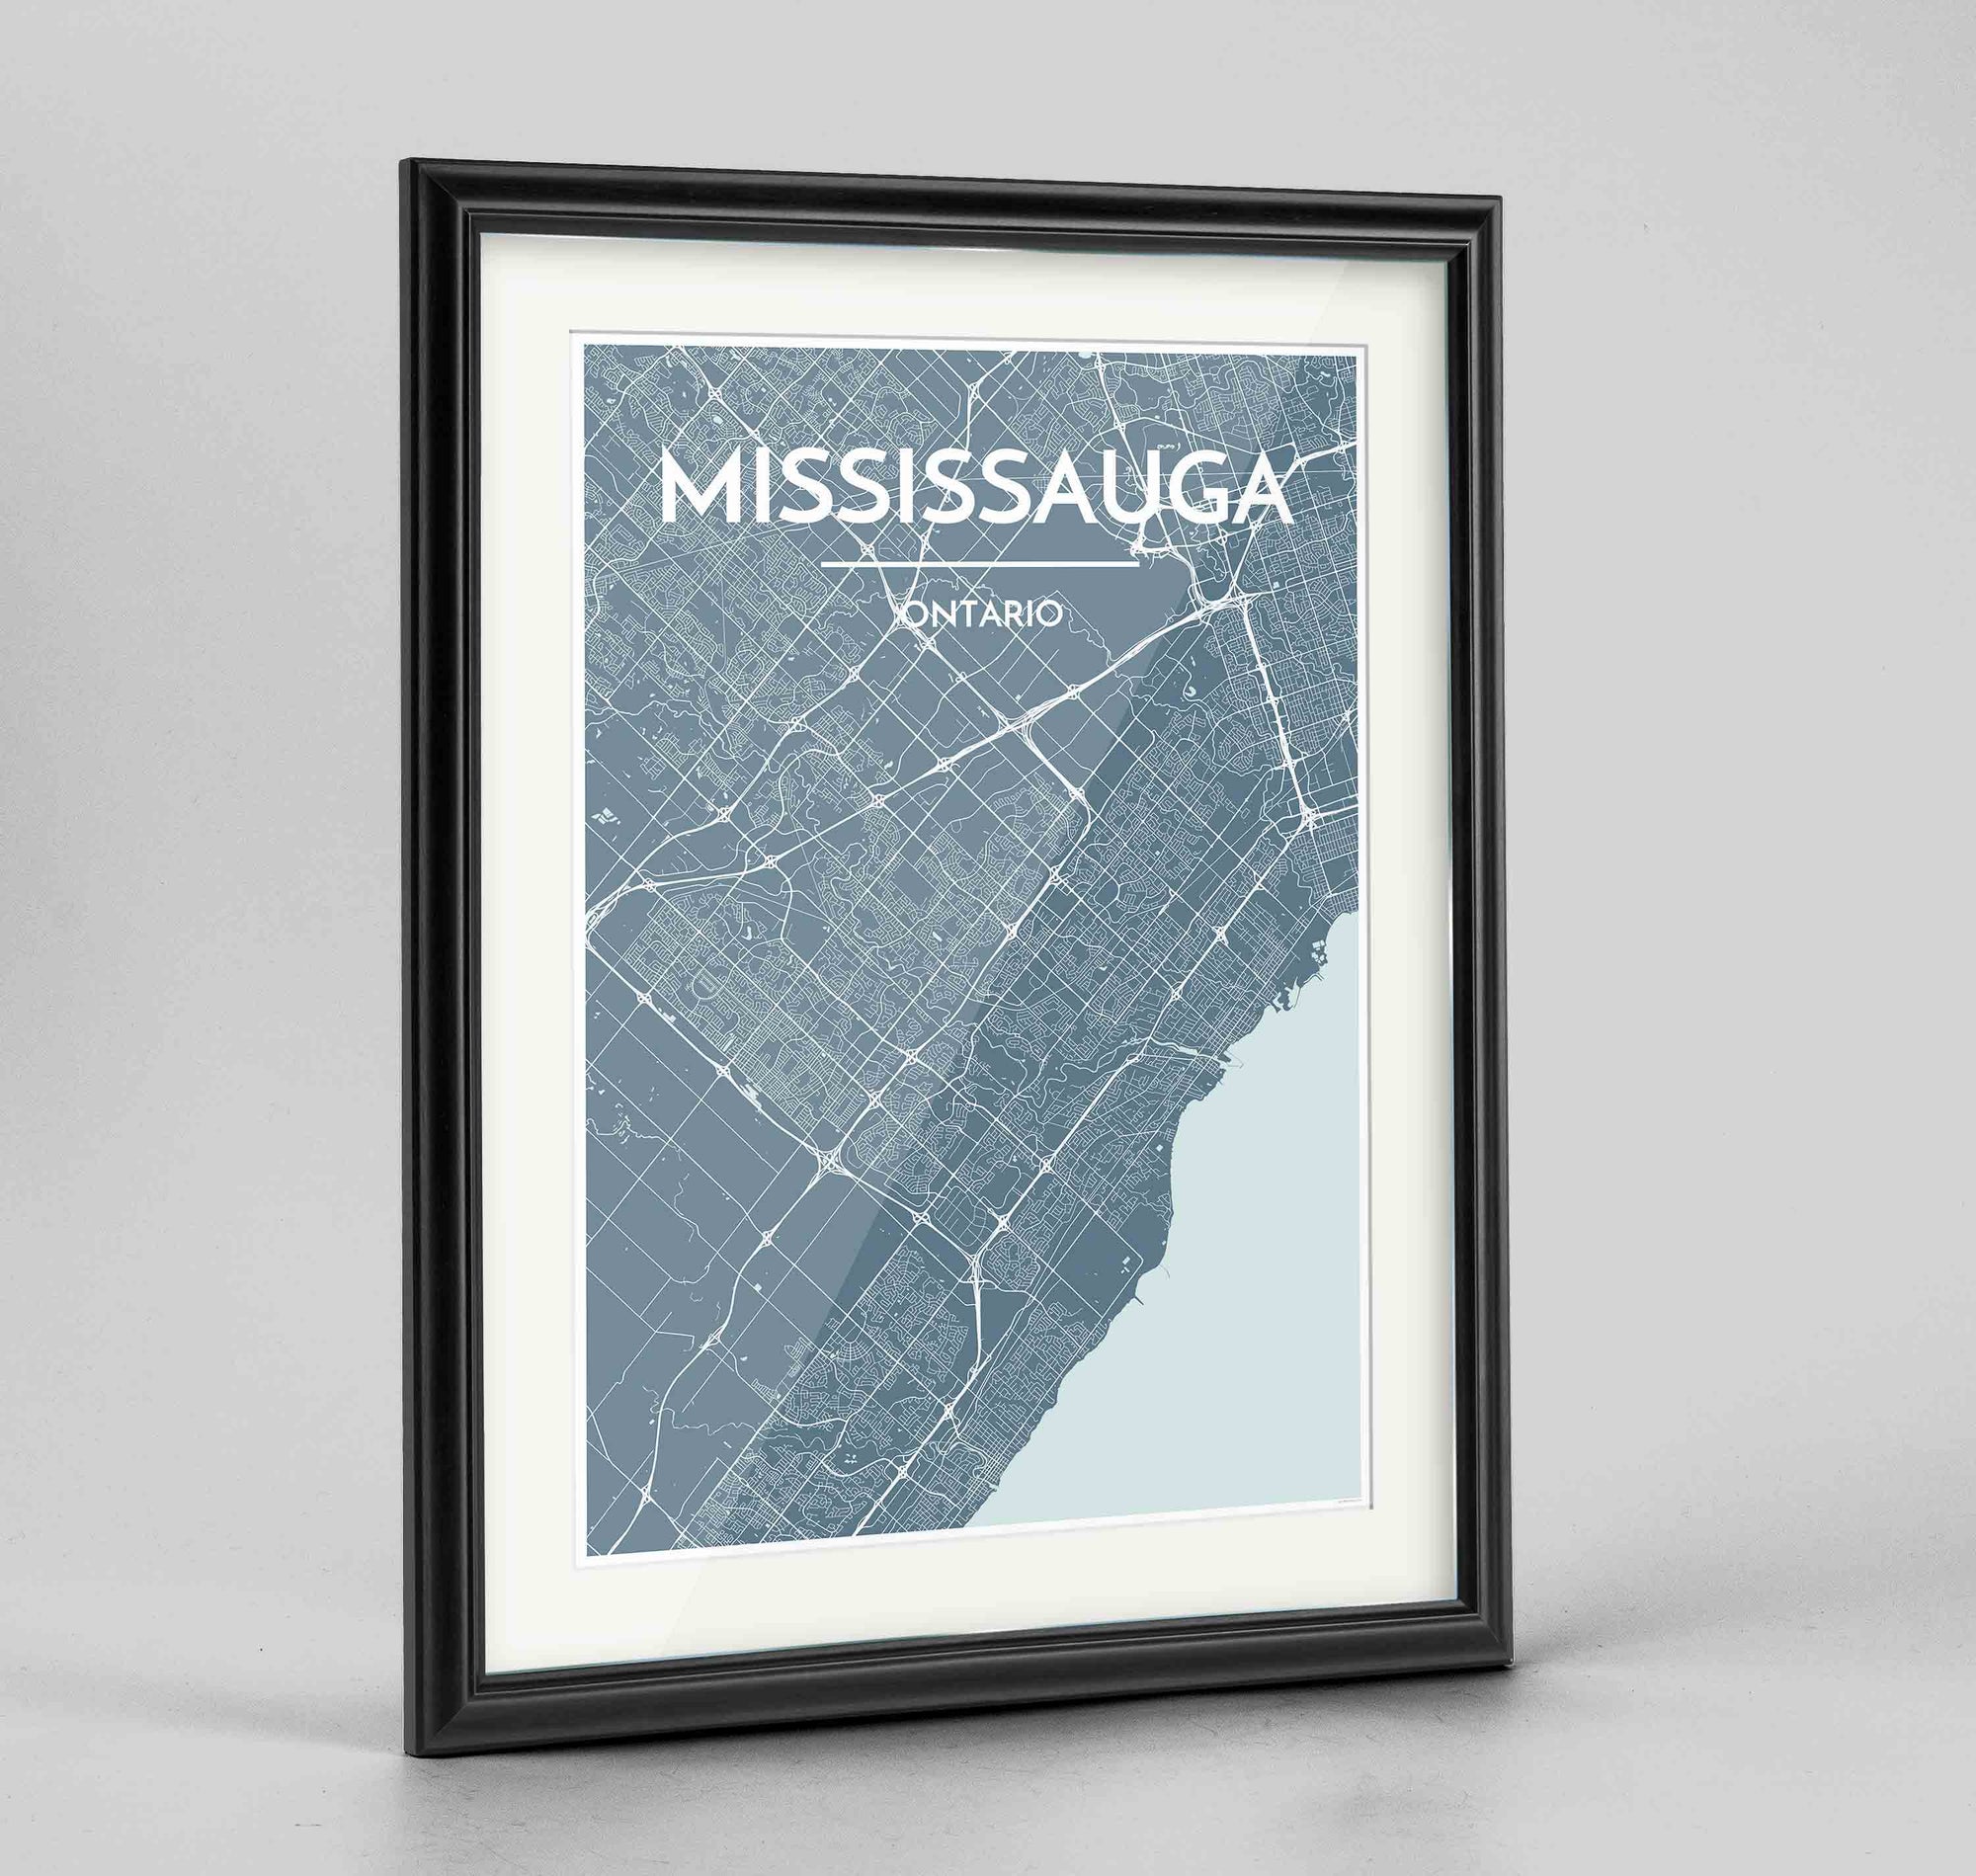 Framed Missisauga City Map 24x36" Traditional Black frame Point Two Design Group